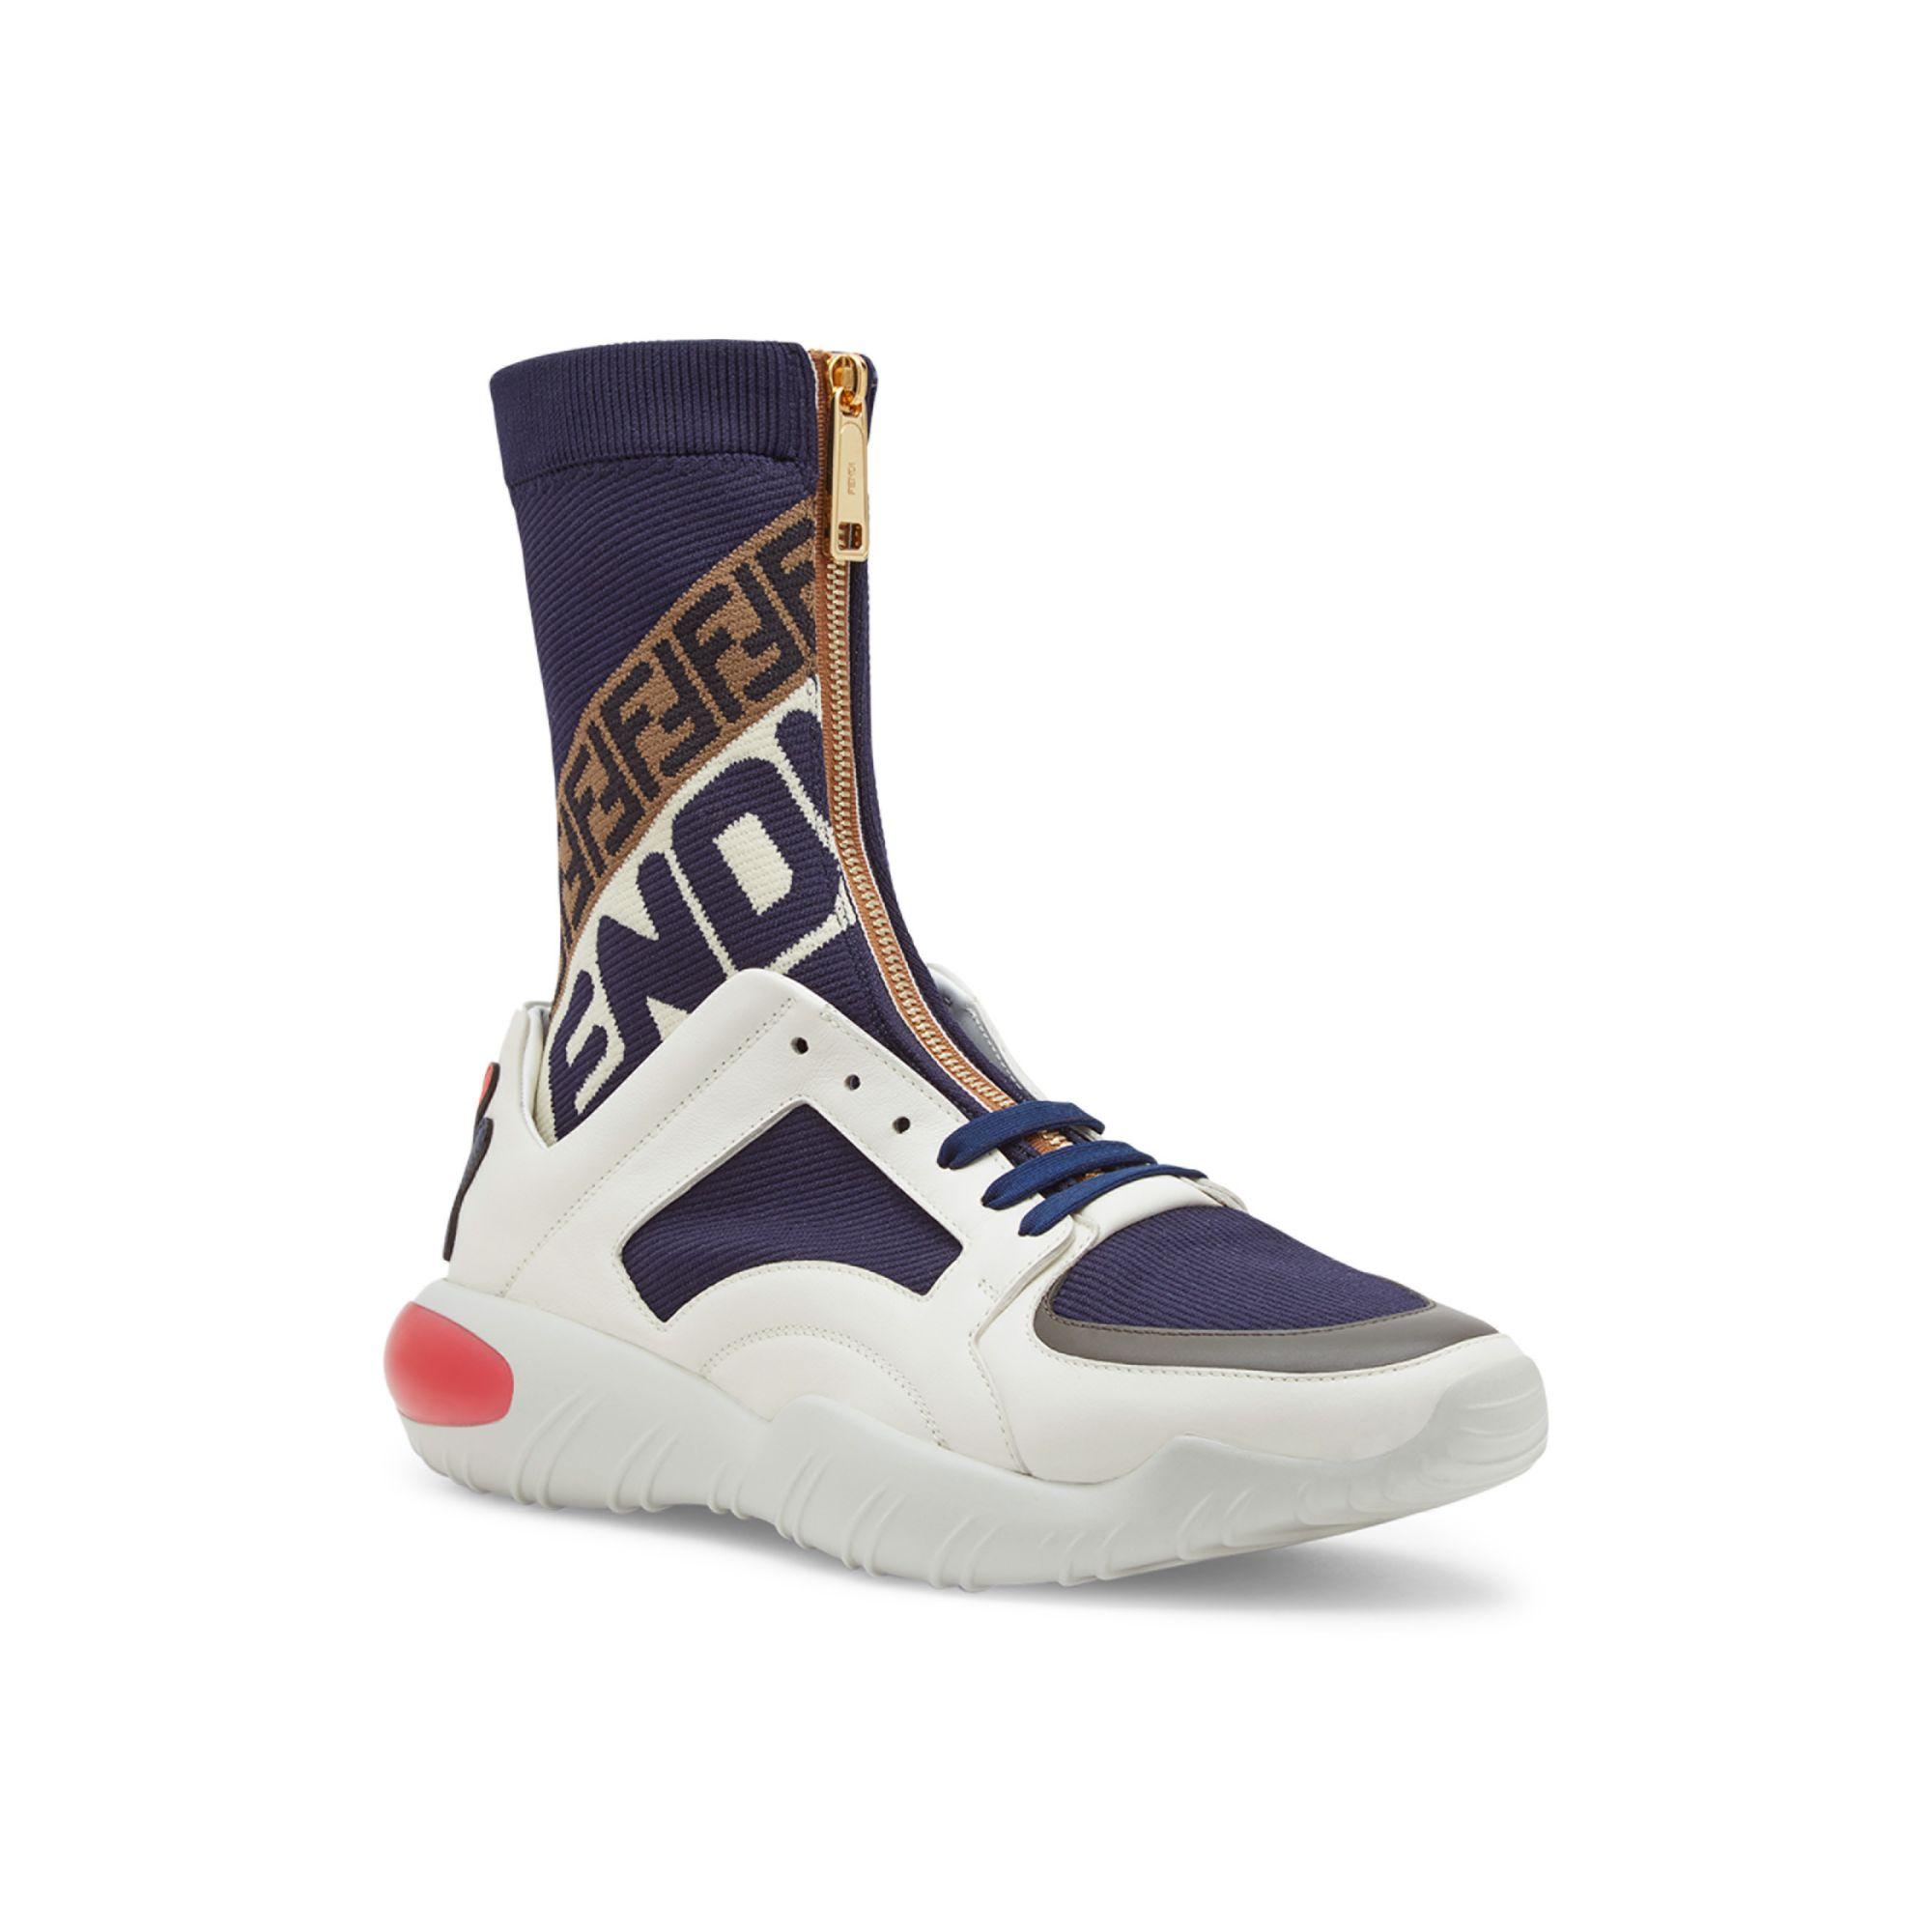 Fendi Lace White And Navy Mania Sock Sneakers in Blue for Men - Lyst